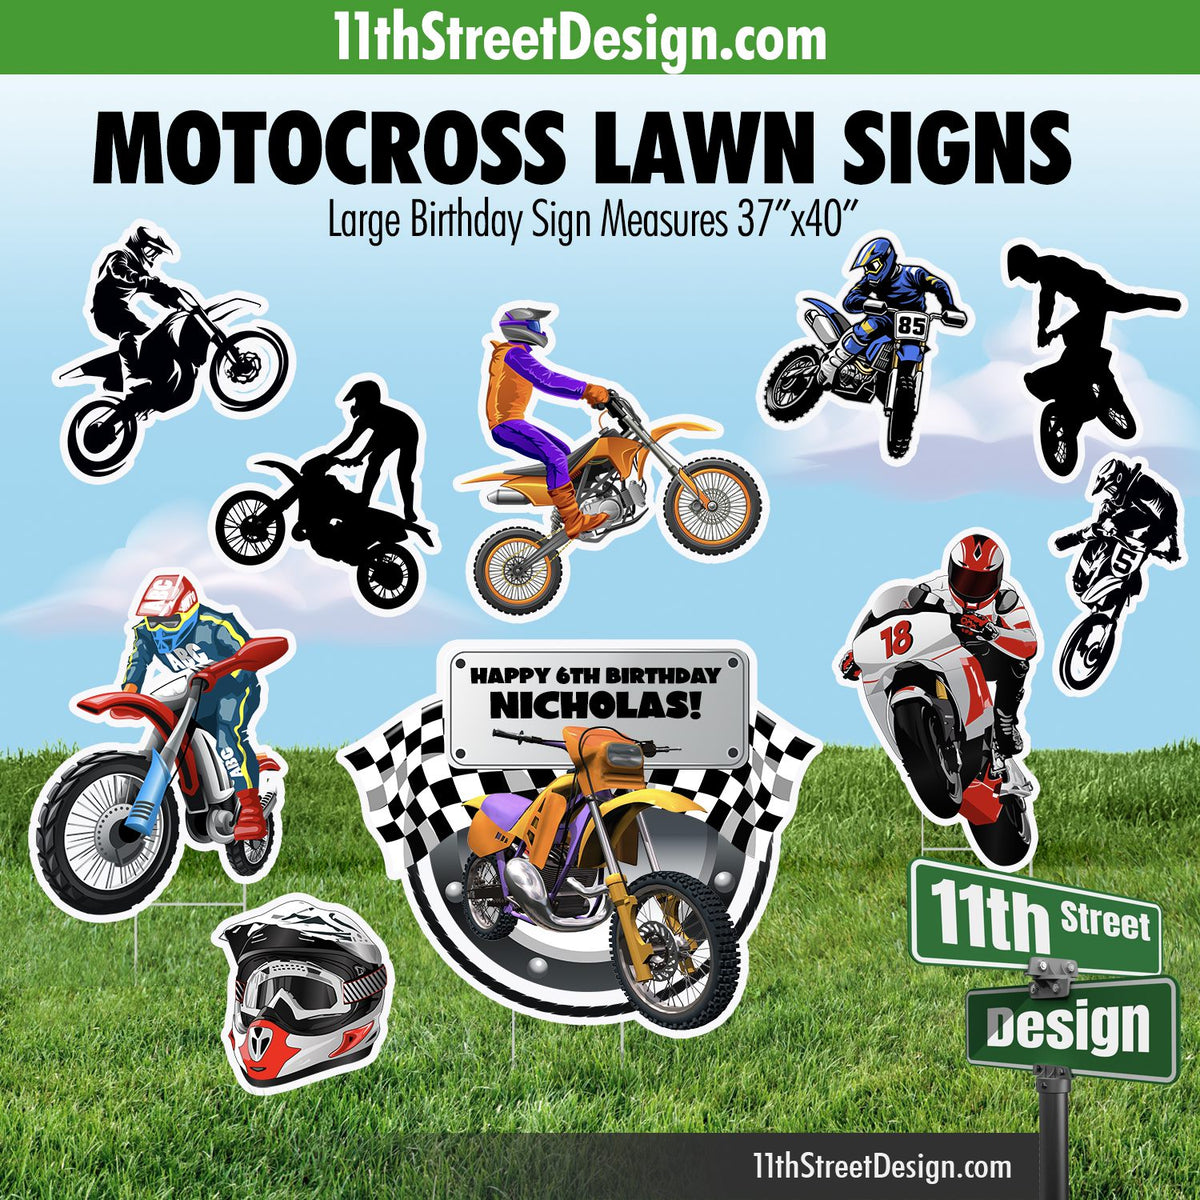 Personalized Motocross Theme Birthday Party Decorations, Yard Card Lawn Signs